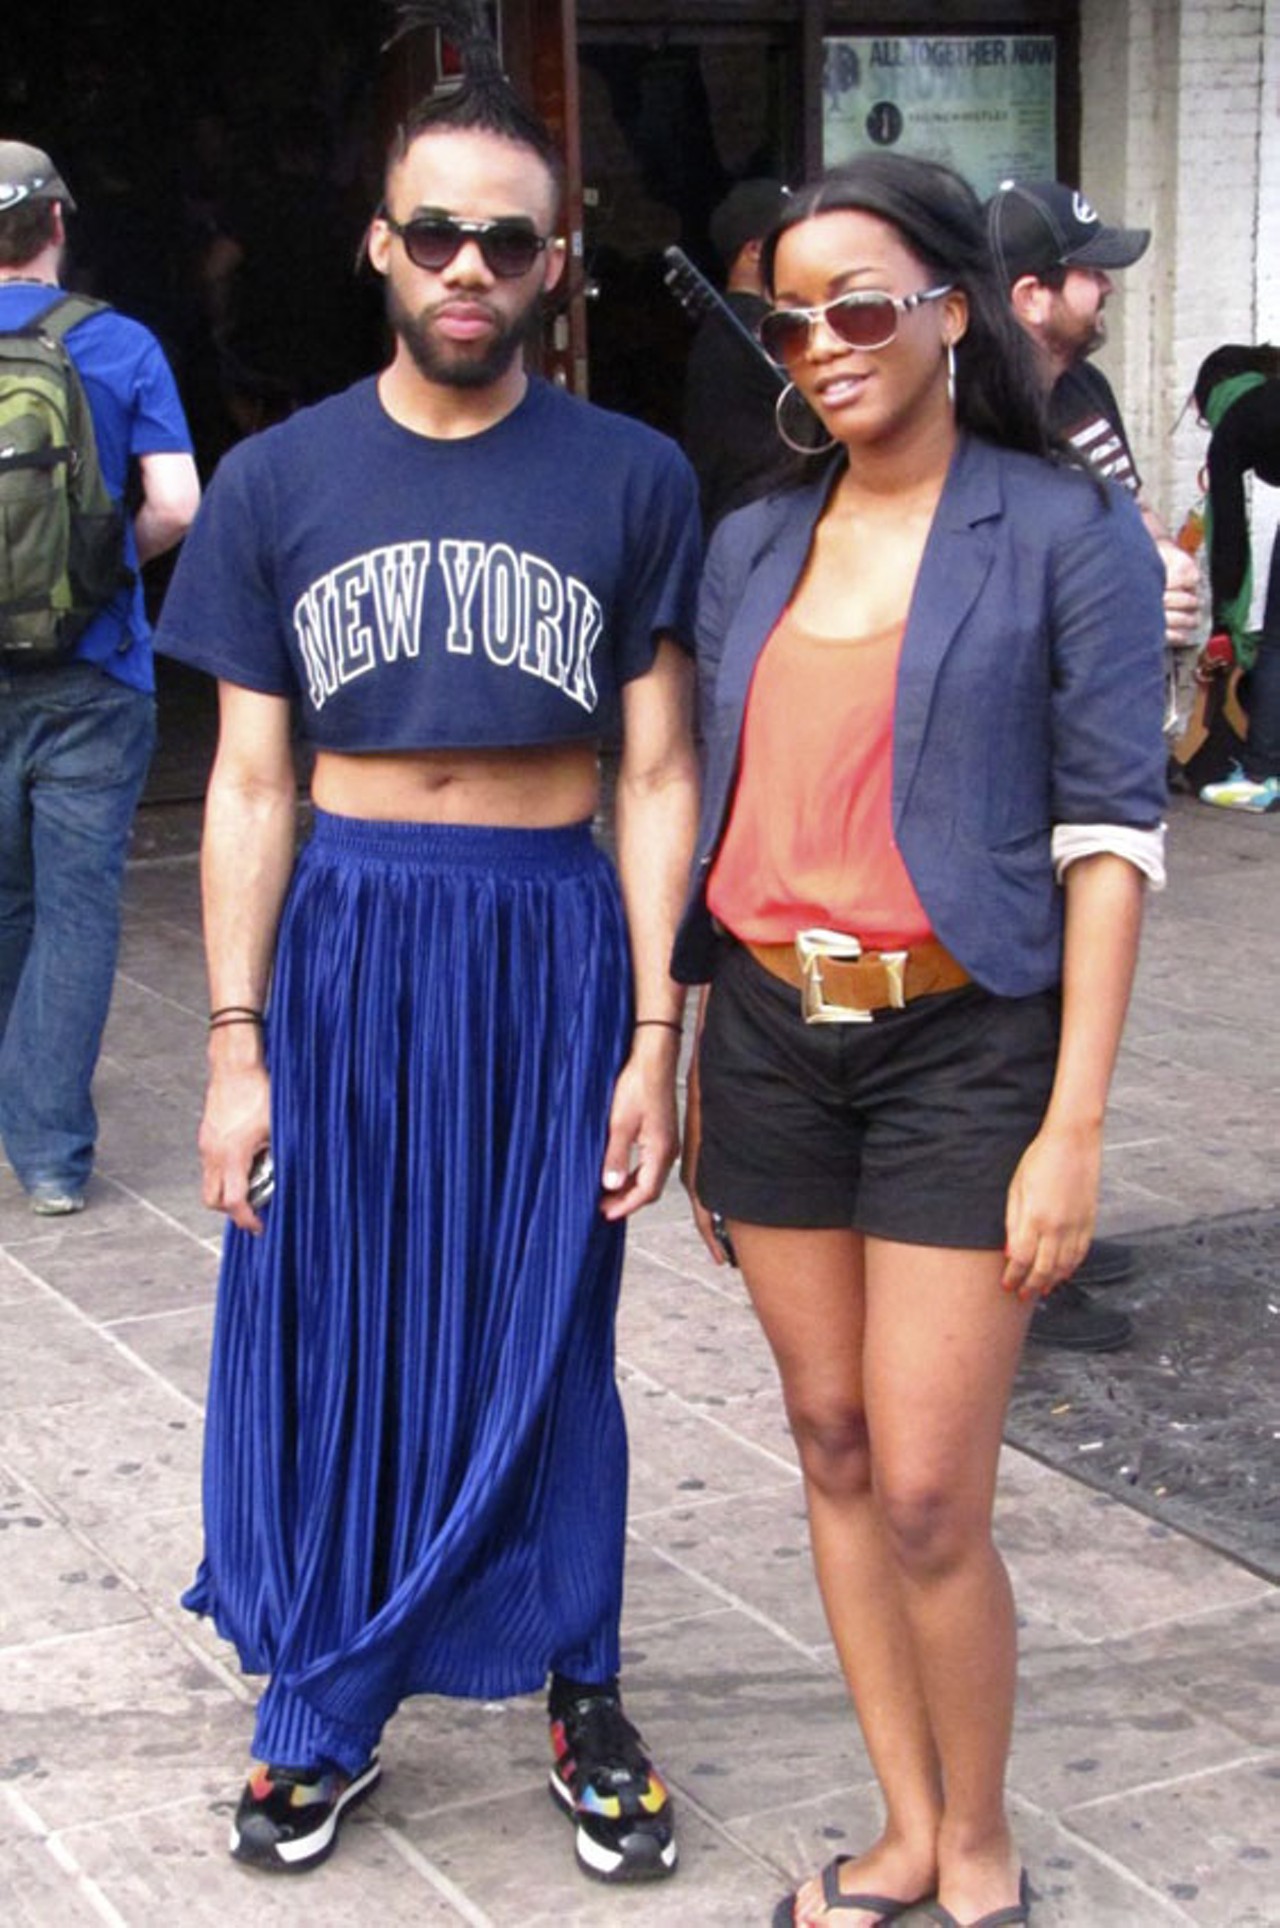 Just like these stylish two, hipsters can be seen far and wide at SXSW